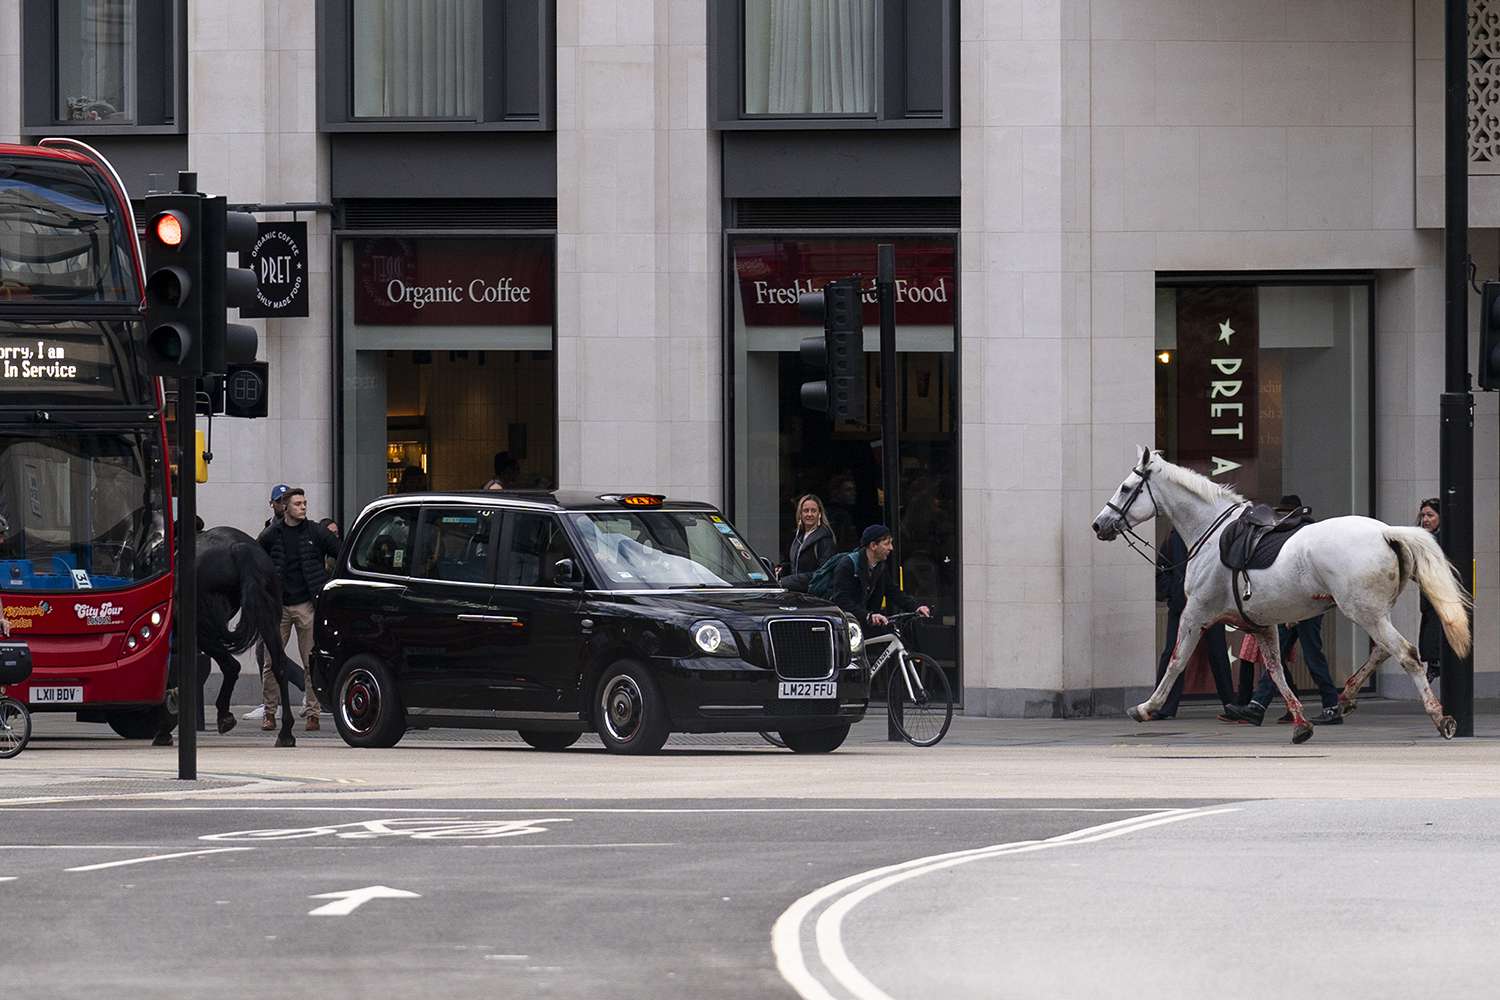 Two horses on the loose bolt through the streets of London near Aldwych. 